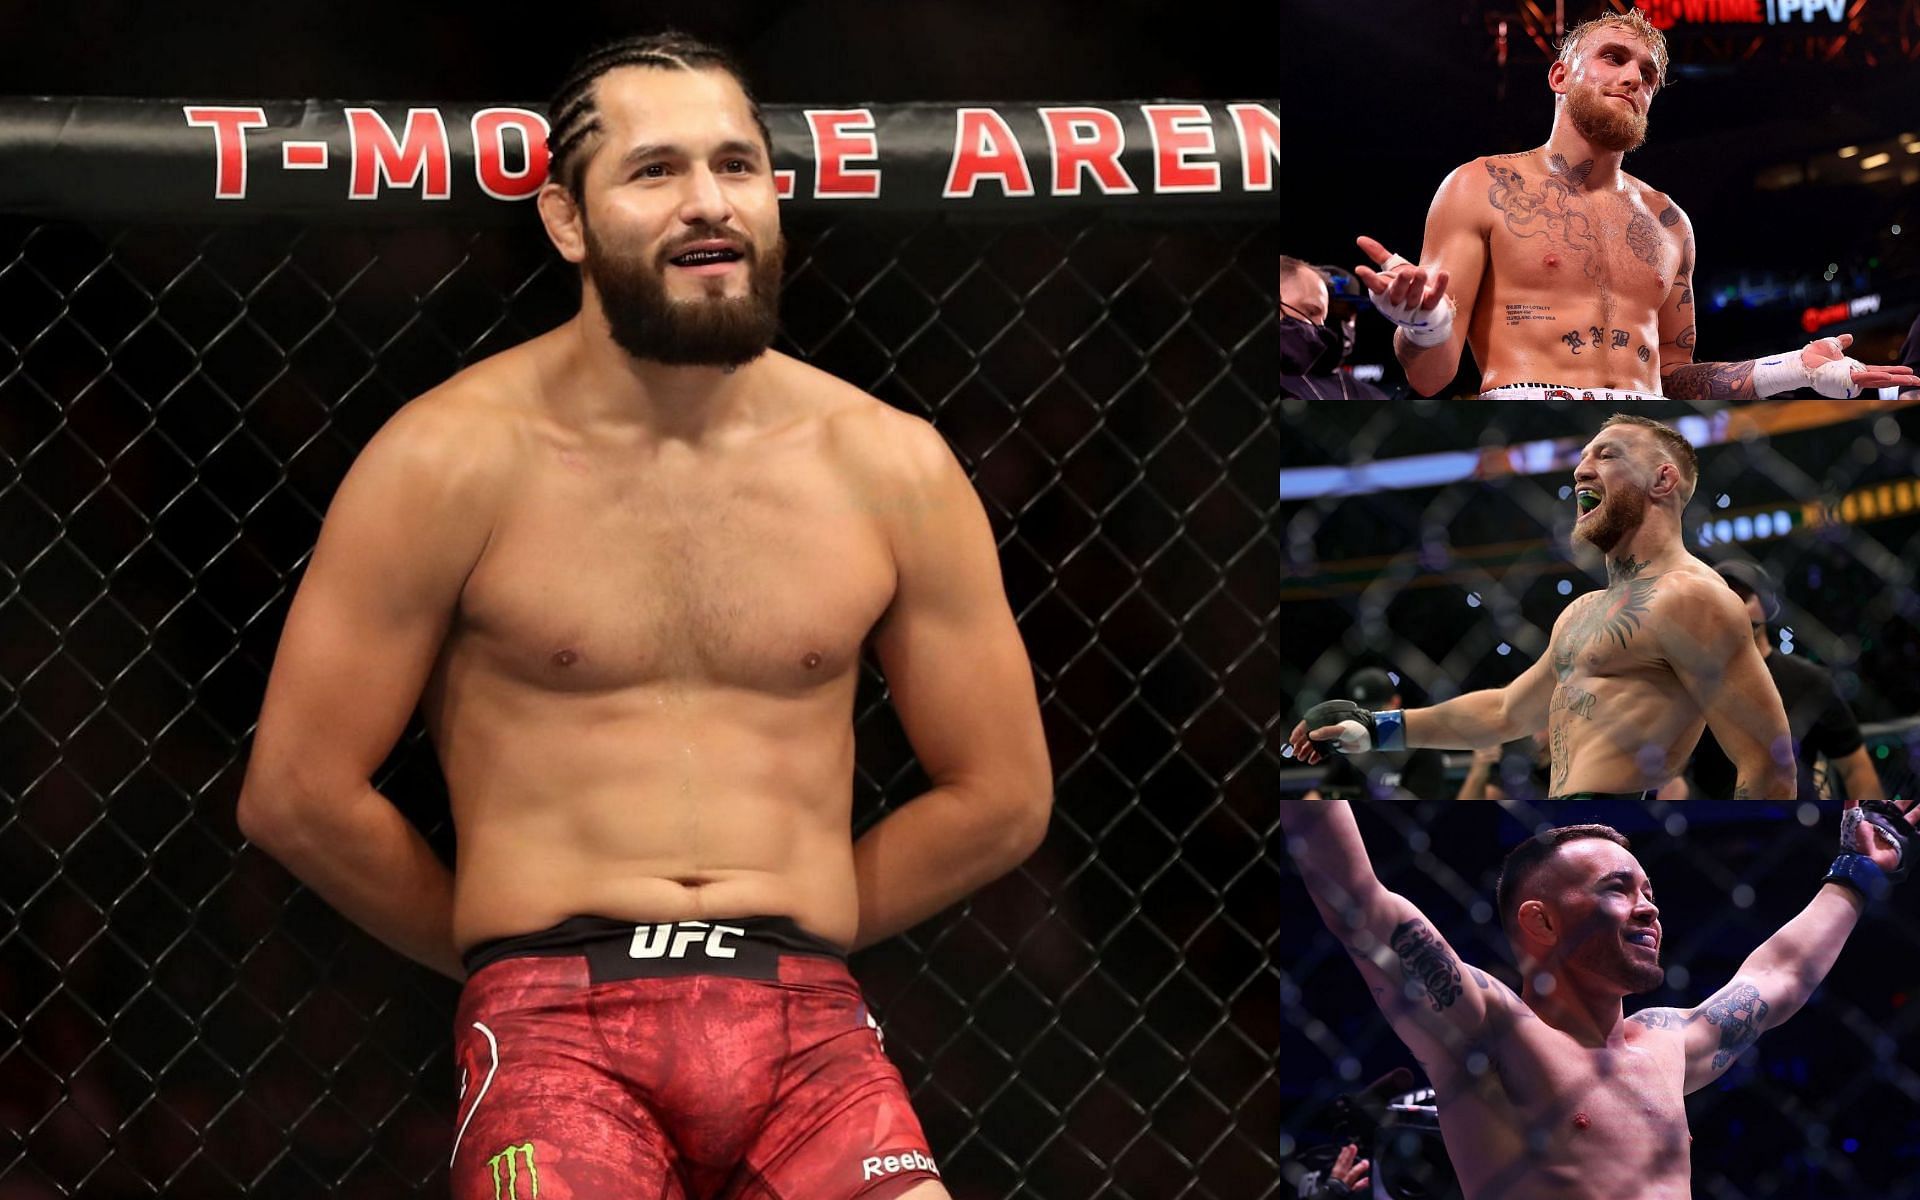 Jorge Masvidal calls out Jake Paul, Conor McGregor, and Colby Covington